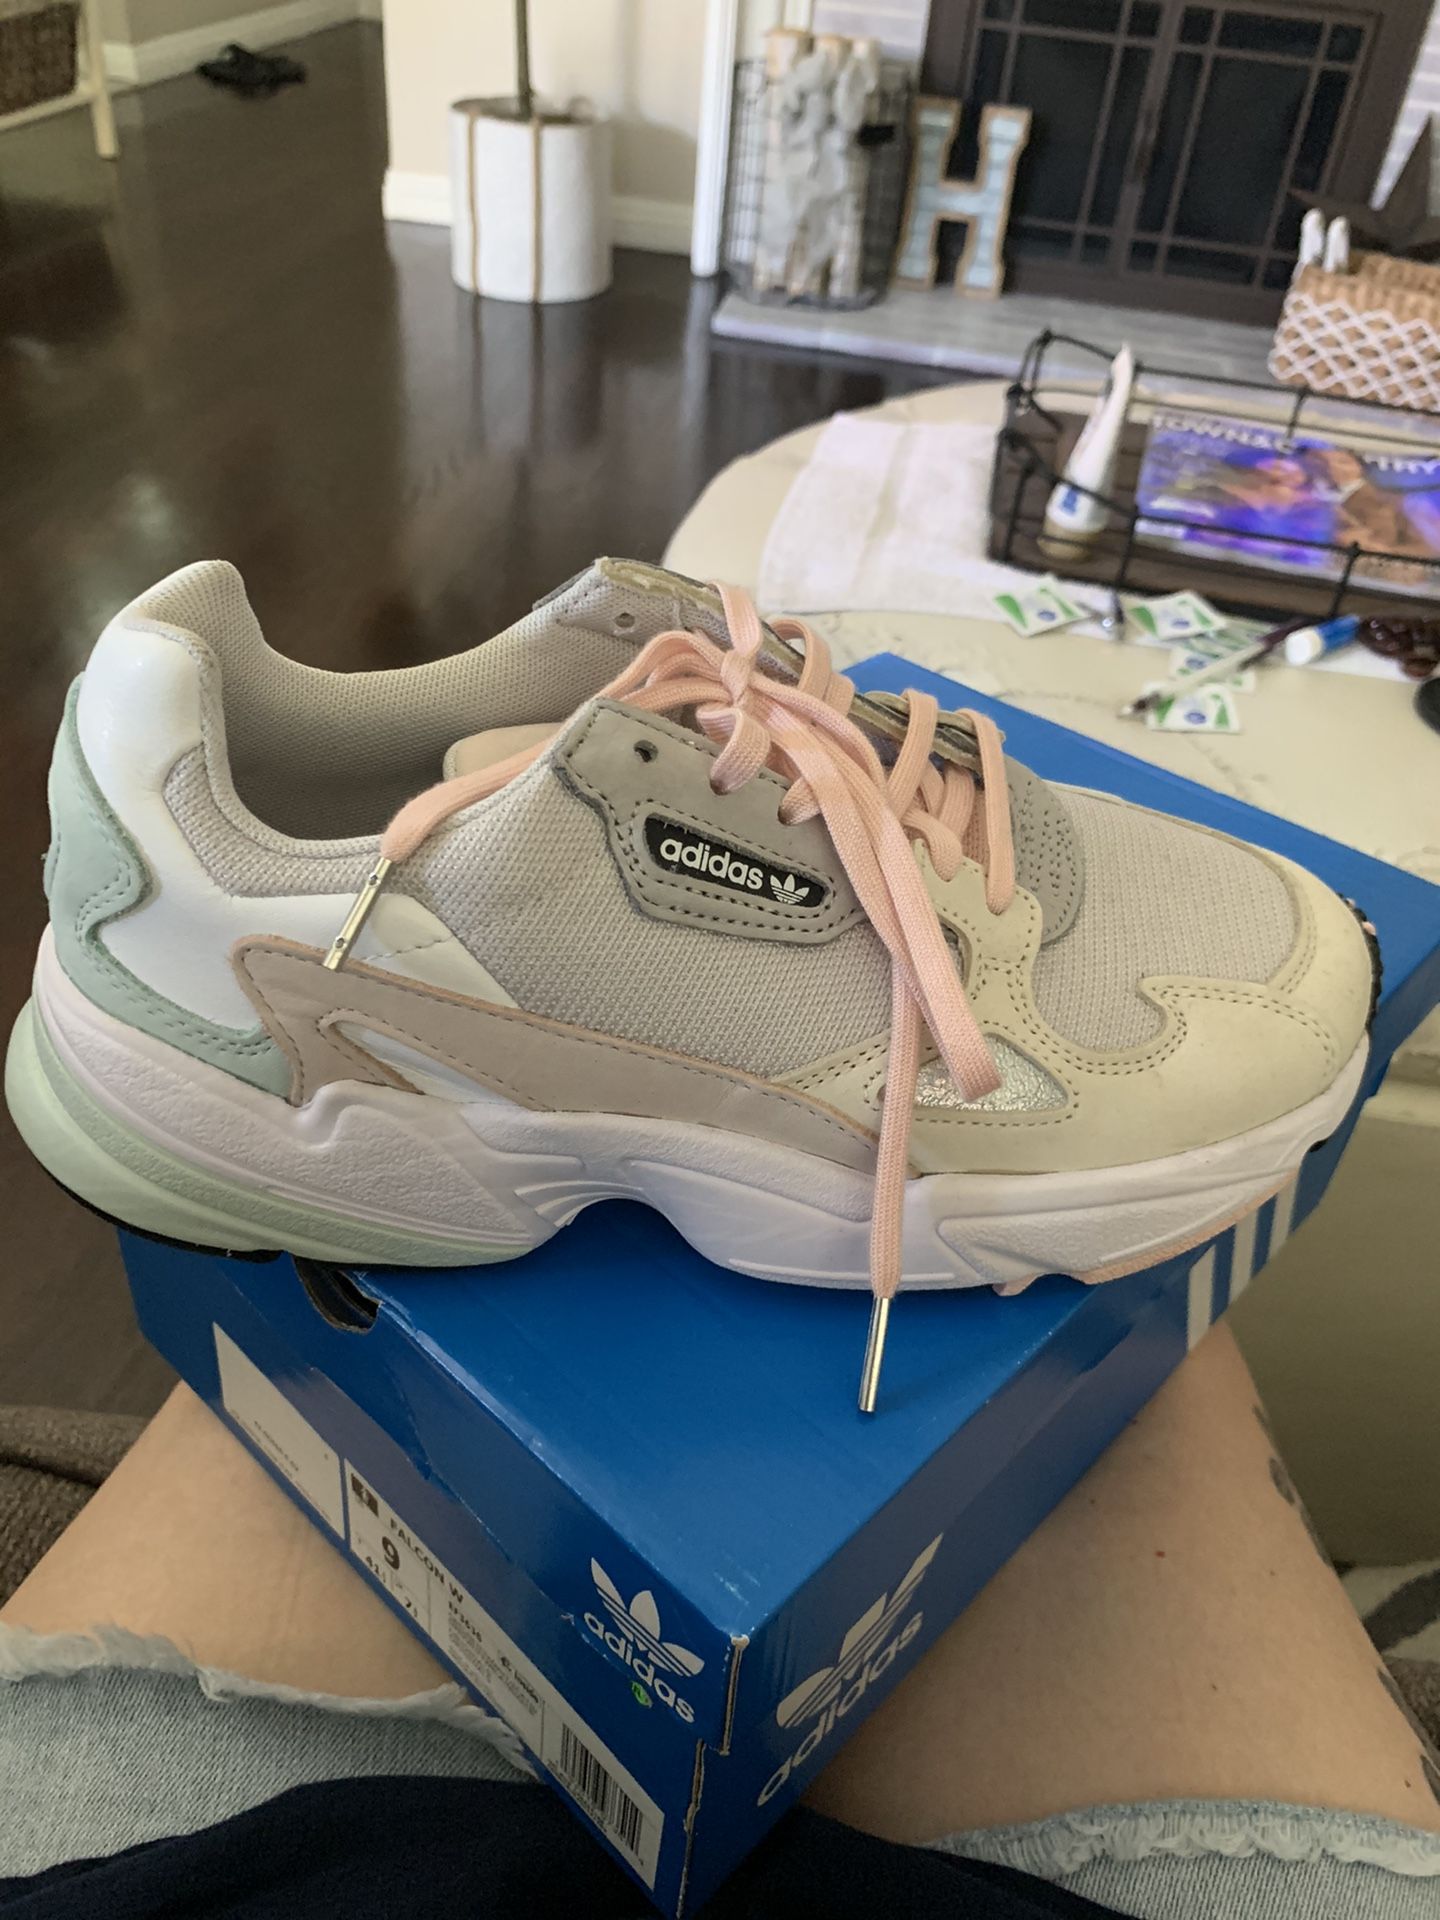 FREE Women’s adidas sneakers to a “Whitter Resident”